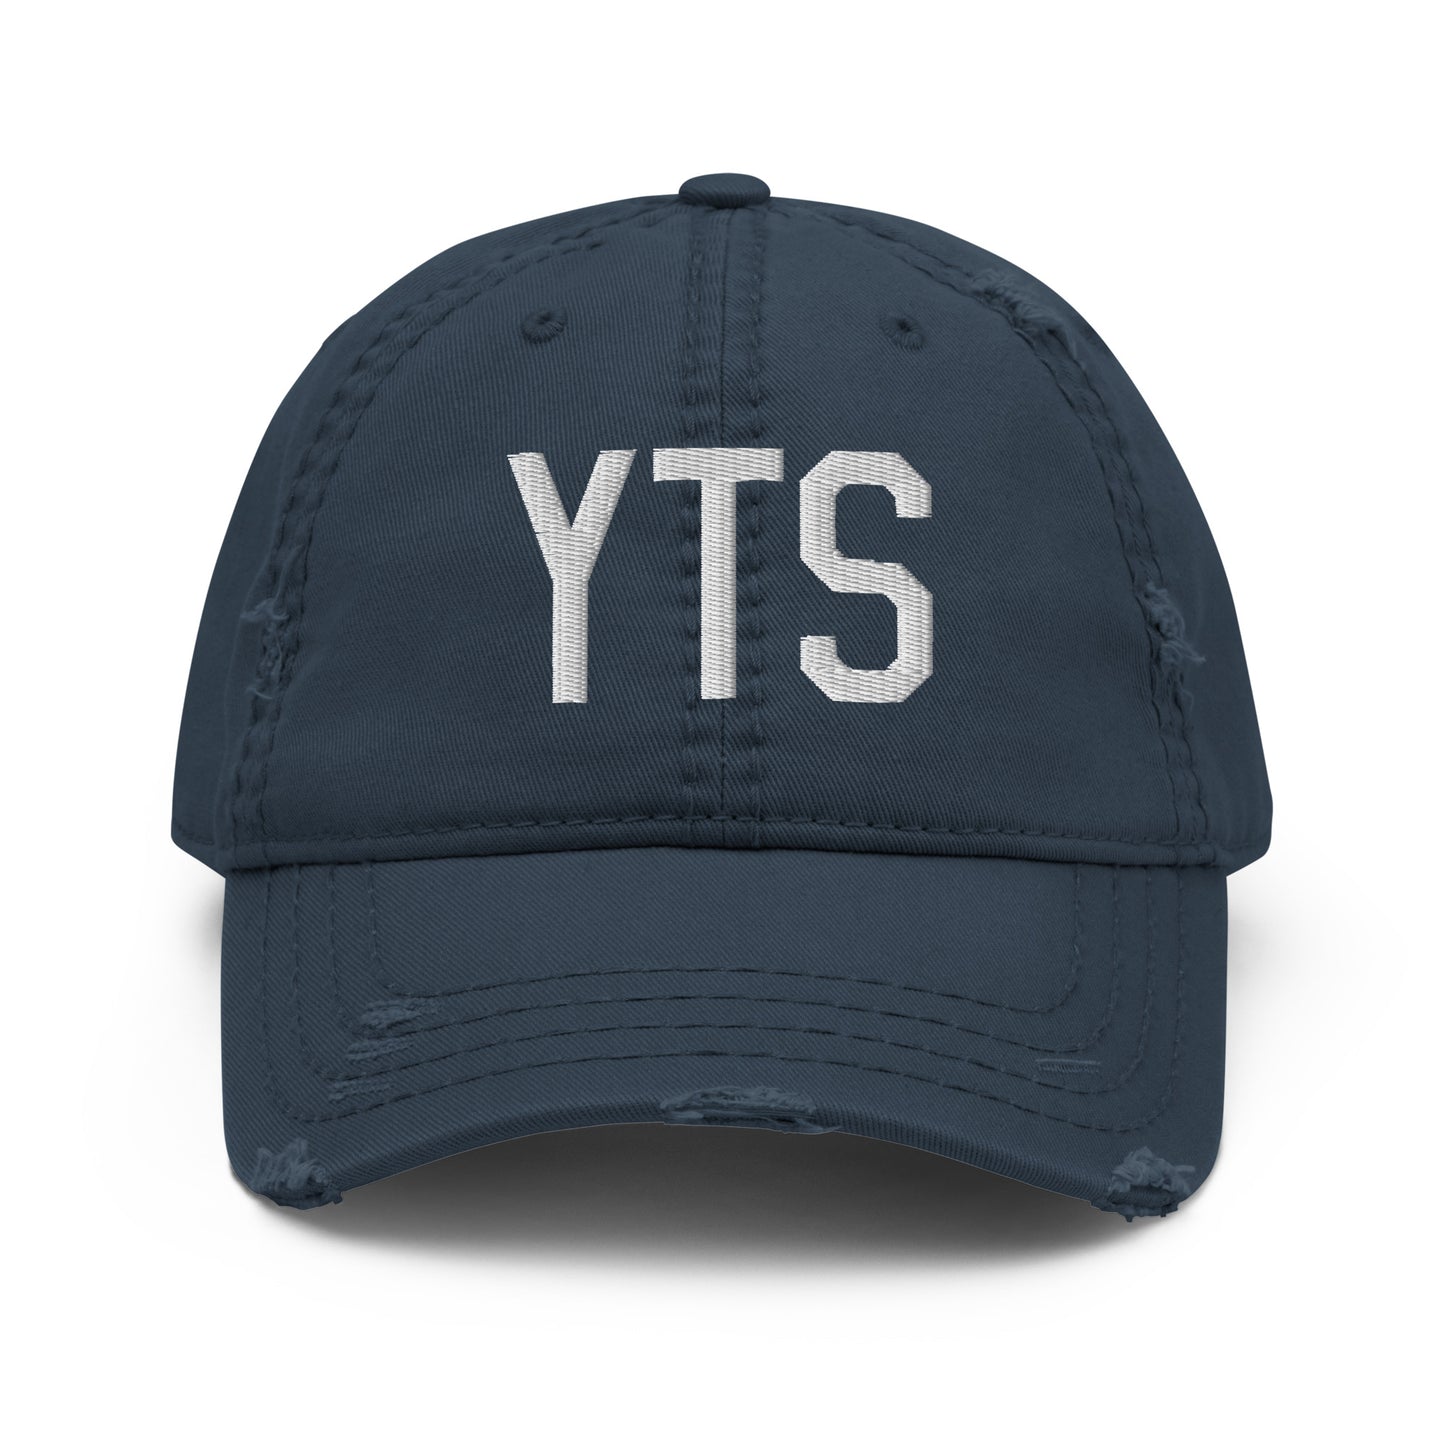 Airport Code Distressed Hat - White • YTS Timmins • YHM Designs - Image 13